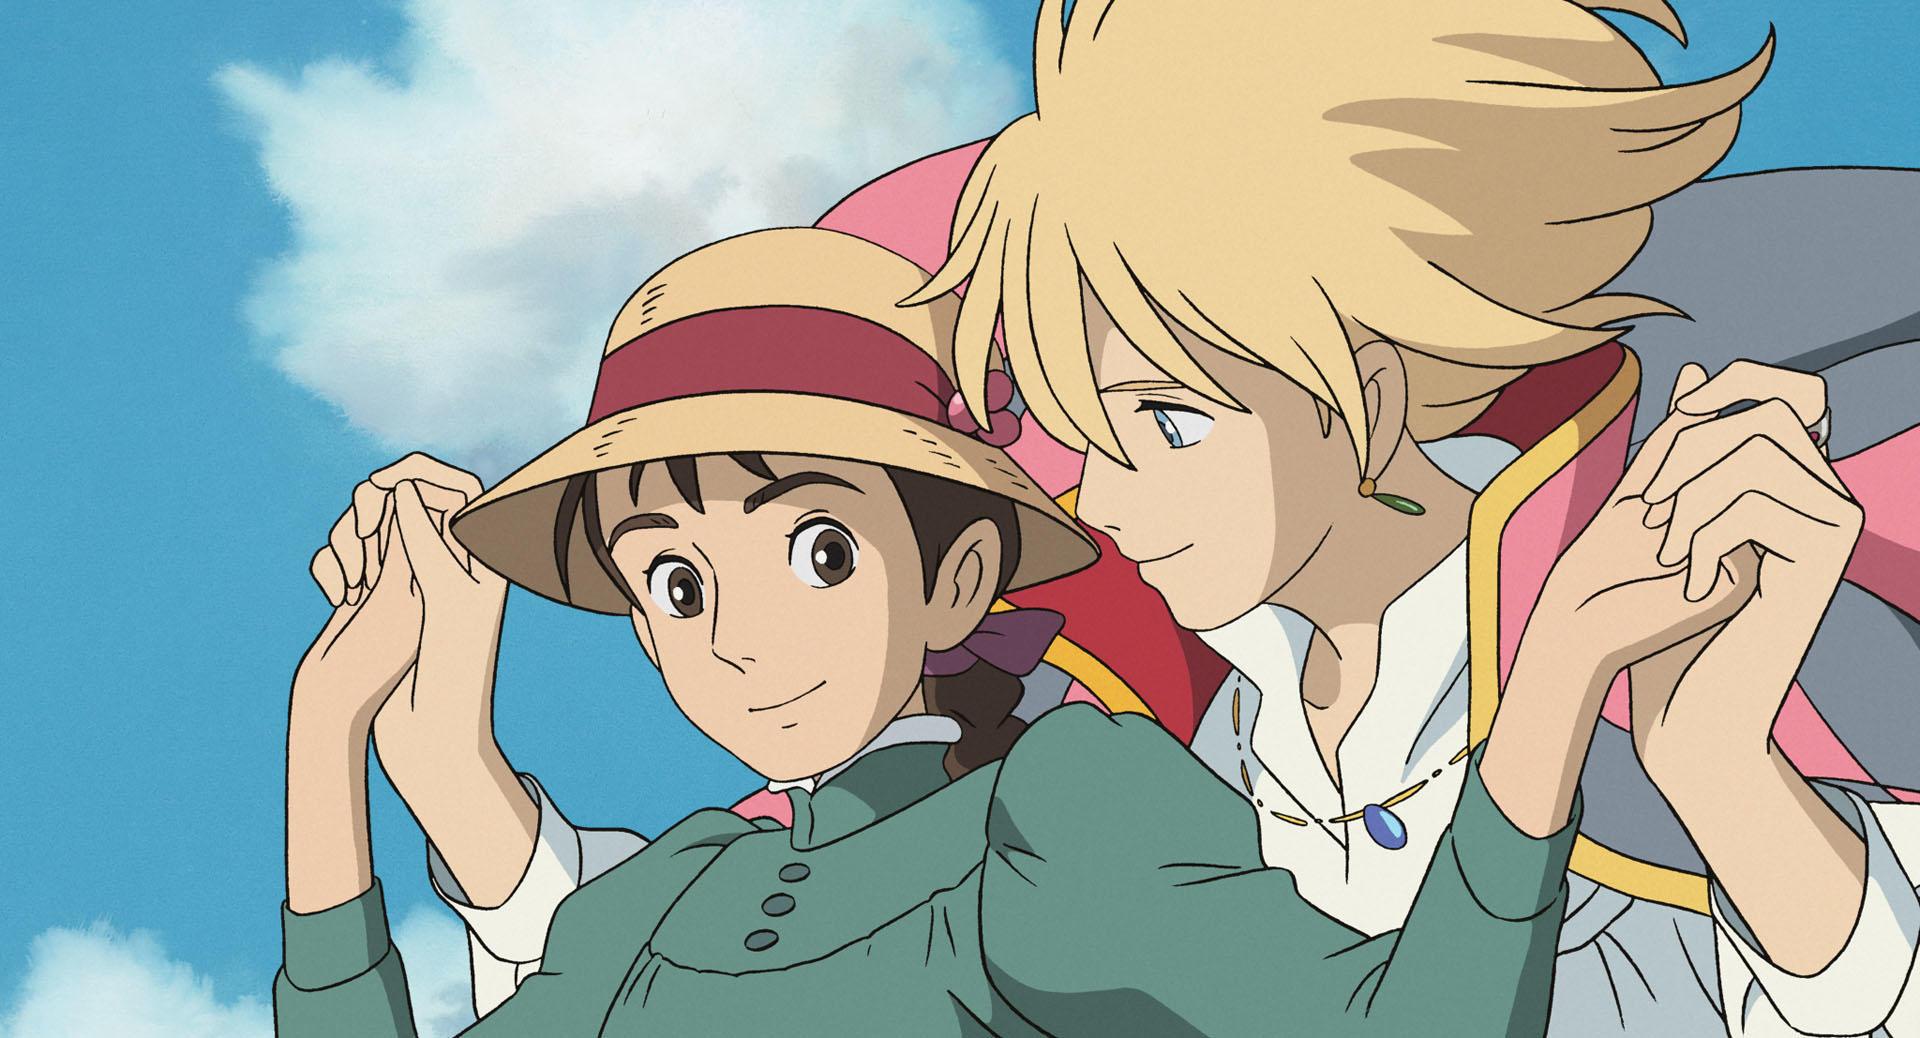 Studio Ghibli to receive honorary Palme d’Or at Cannes thumbnail